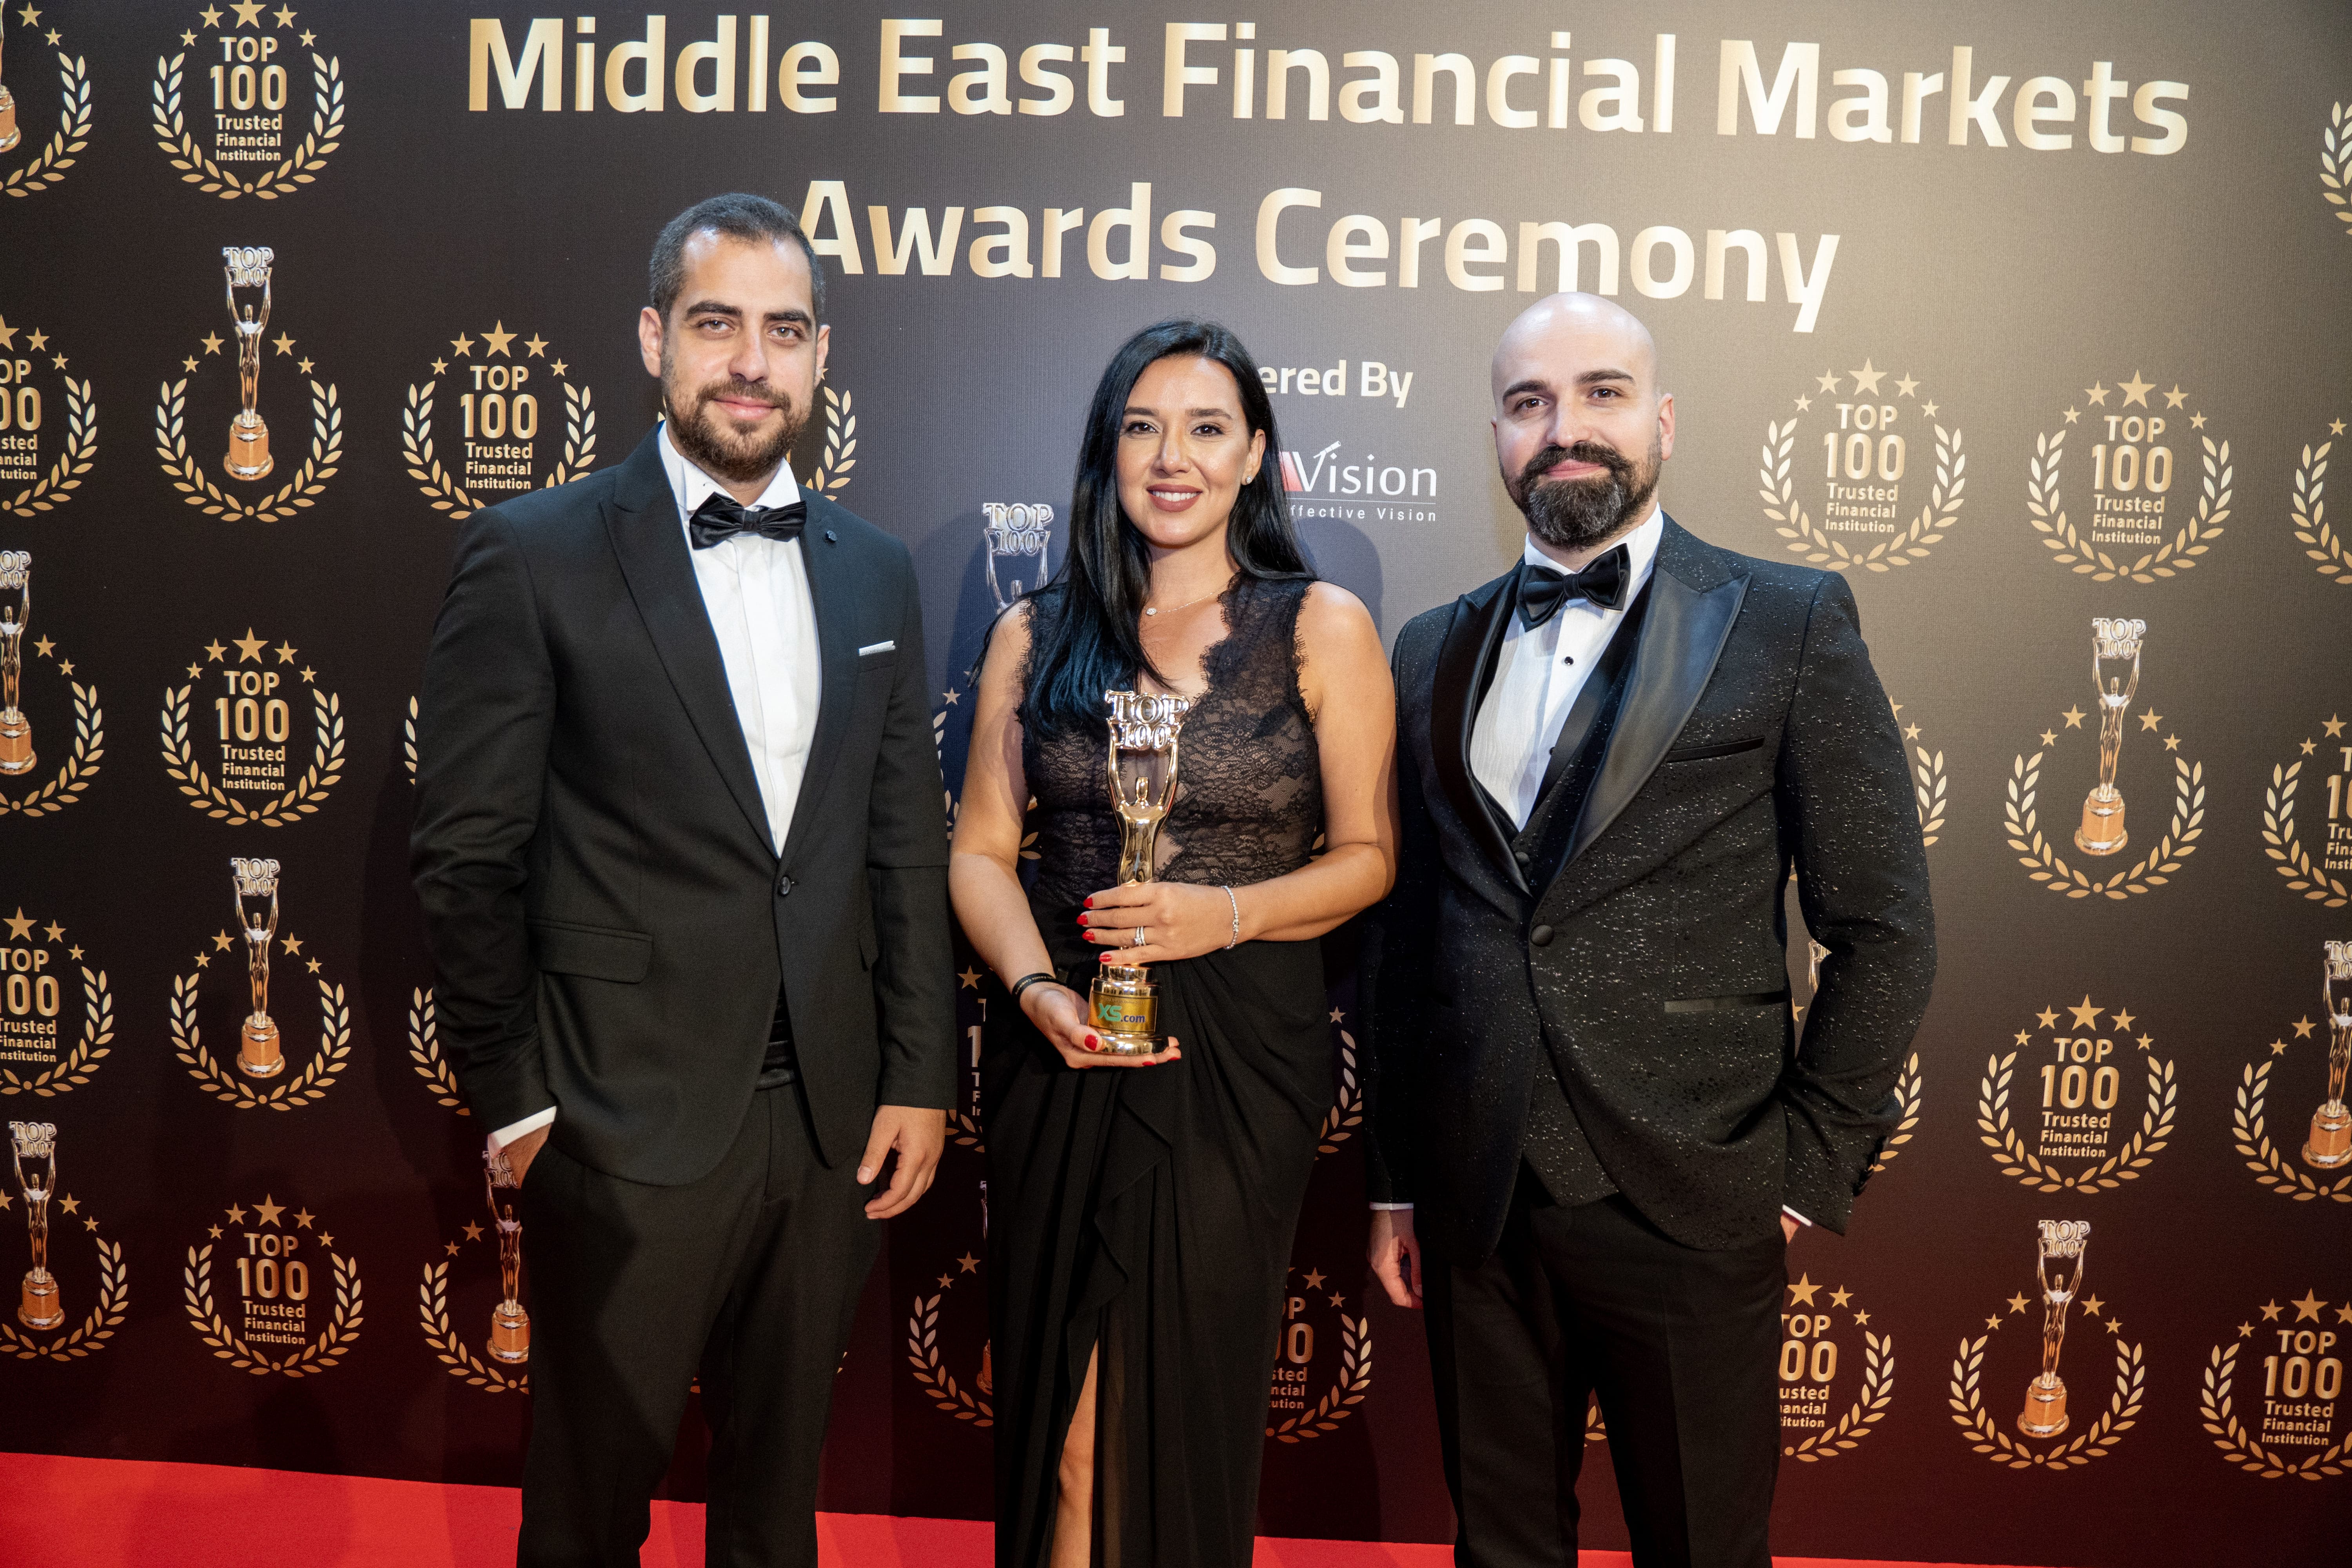 MIDDLE EAST FINANCIAL MARKETS CEREMONY 